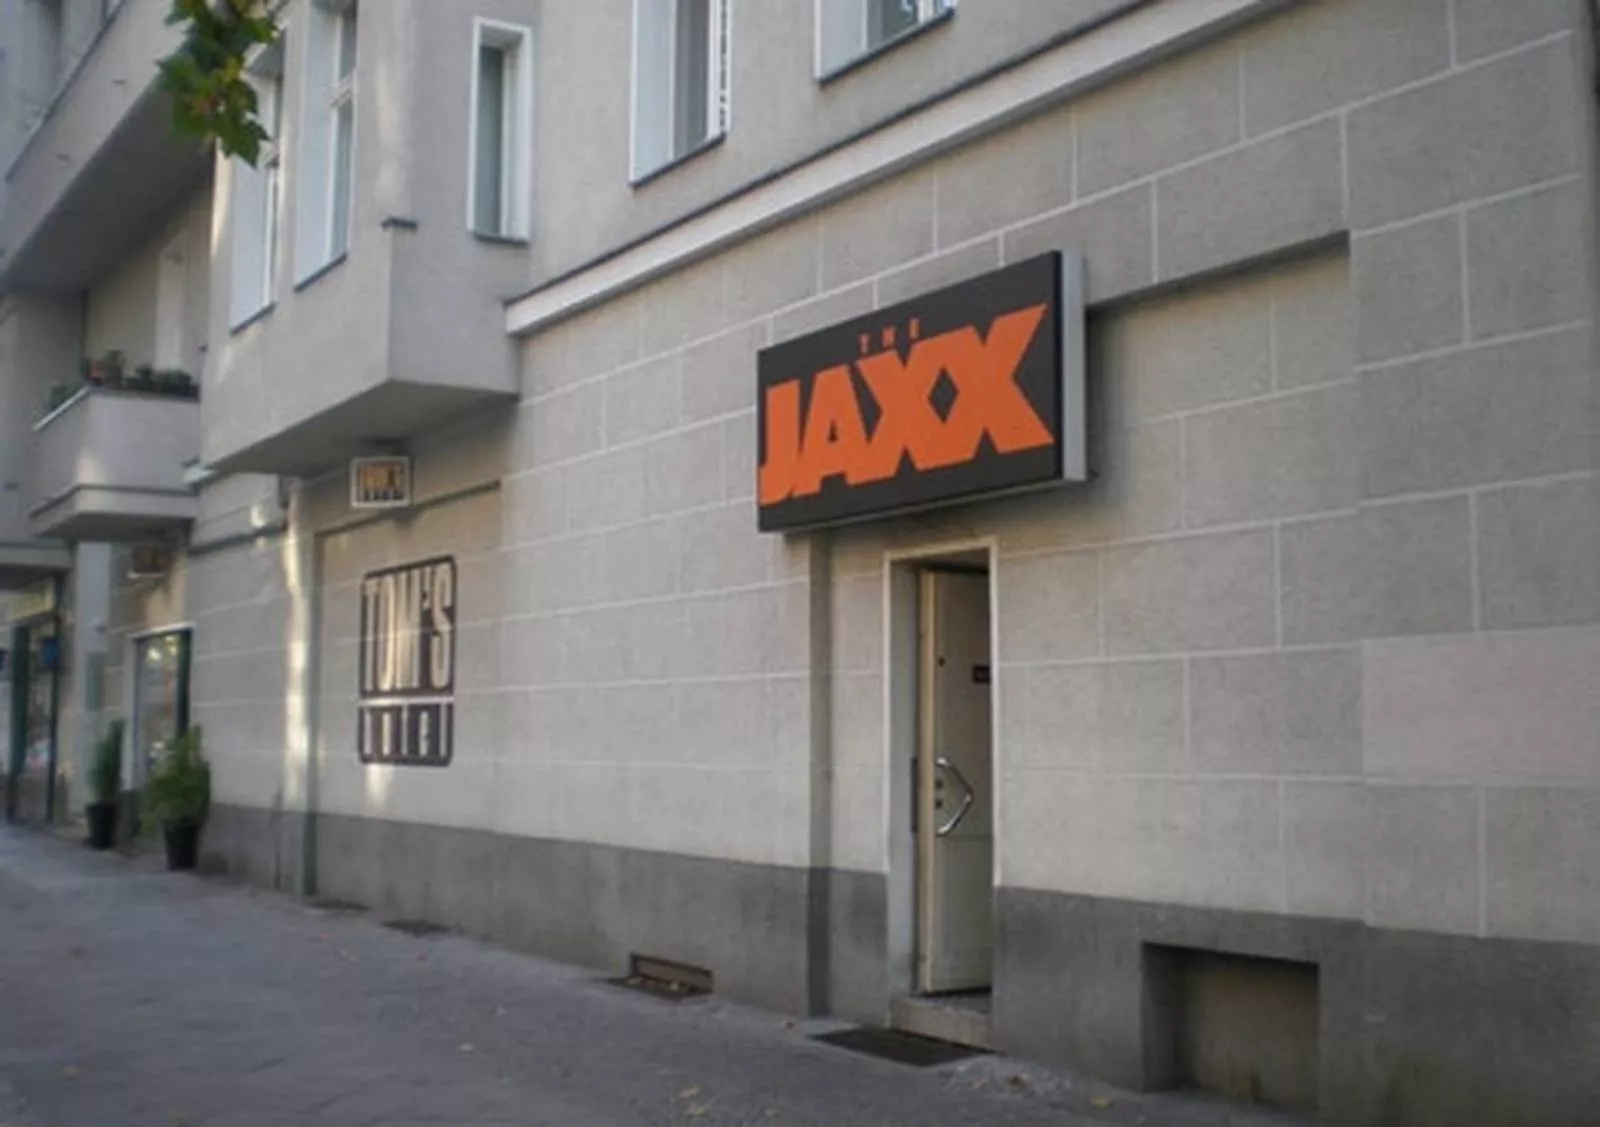 The Jaxx in Germany, Europe  - Rated 0.3